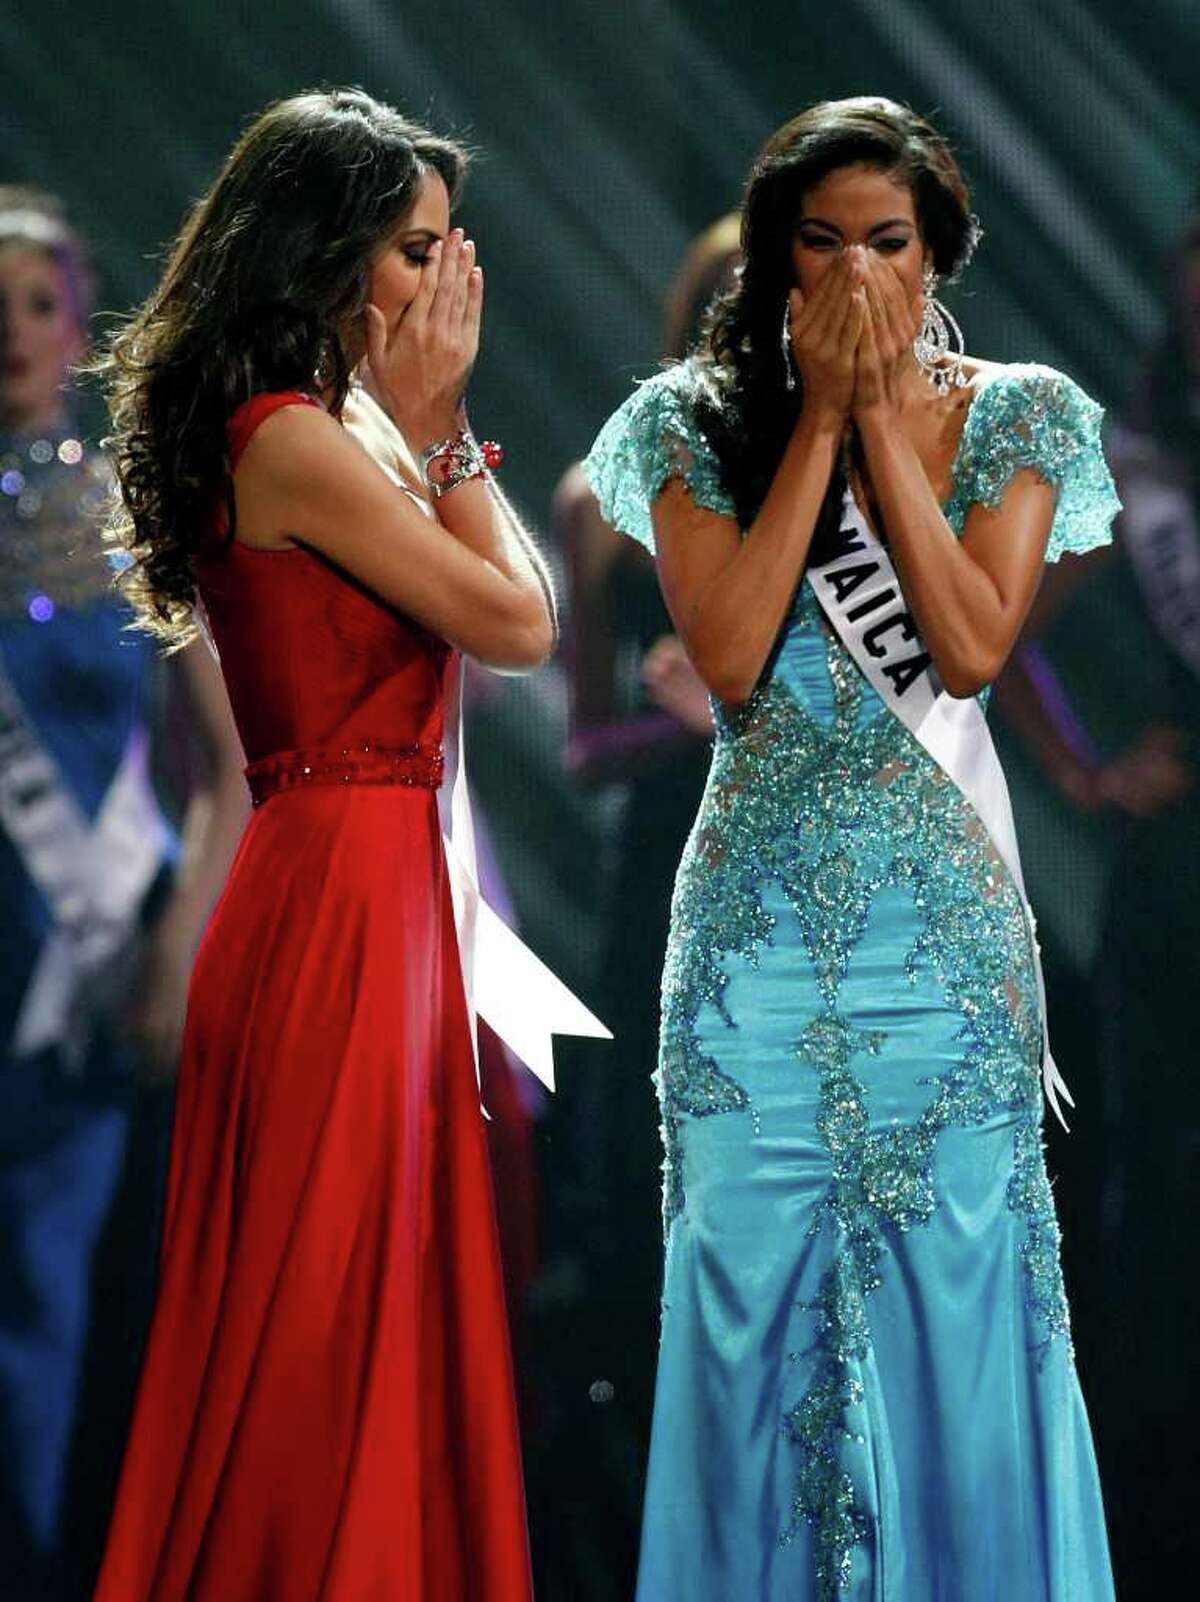 LAS VEGAS - AUGUST 23: Miss Mexico 2010, Jimena Navarrete (L), and Miss Jamaica 2010, Yendi Phillipps, react as Navarette is named the 2010 Miss Universe and Phillipps the first runner-up during the 2010 Miss Universe Pageant at the Mandalay Bay Events Center August 23, 2010 in Las Vegas, Nevada. (Photo by Ethan Miller/Getty Images)